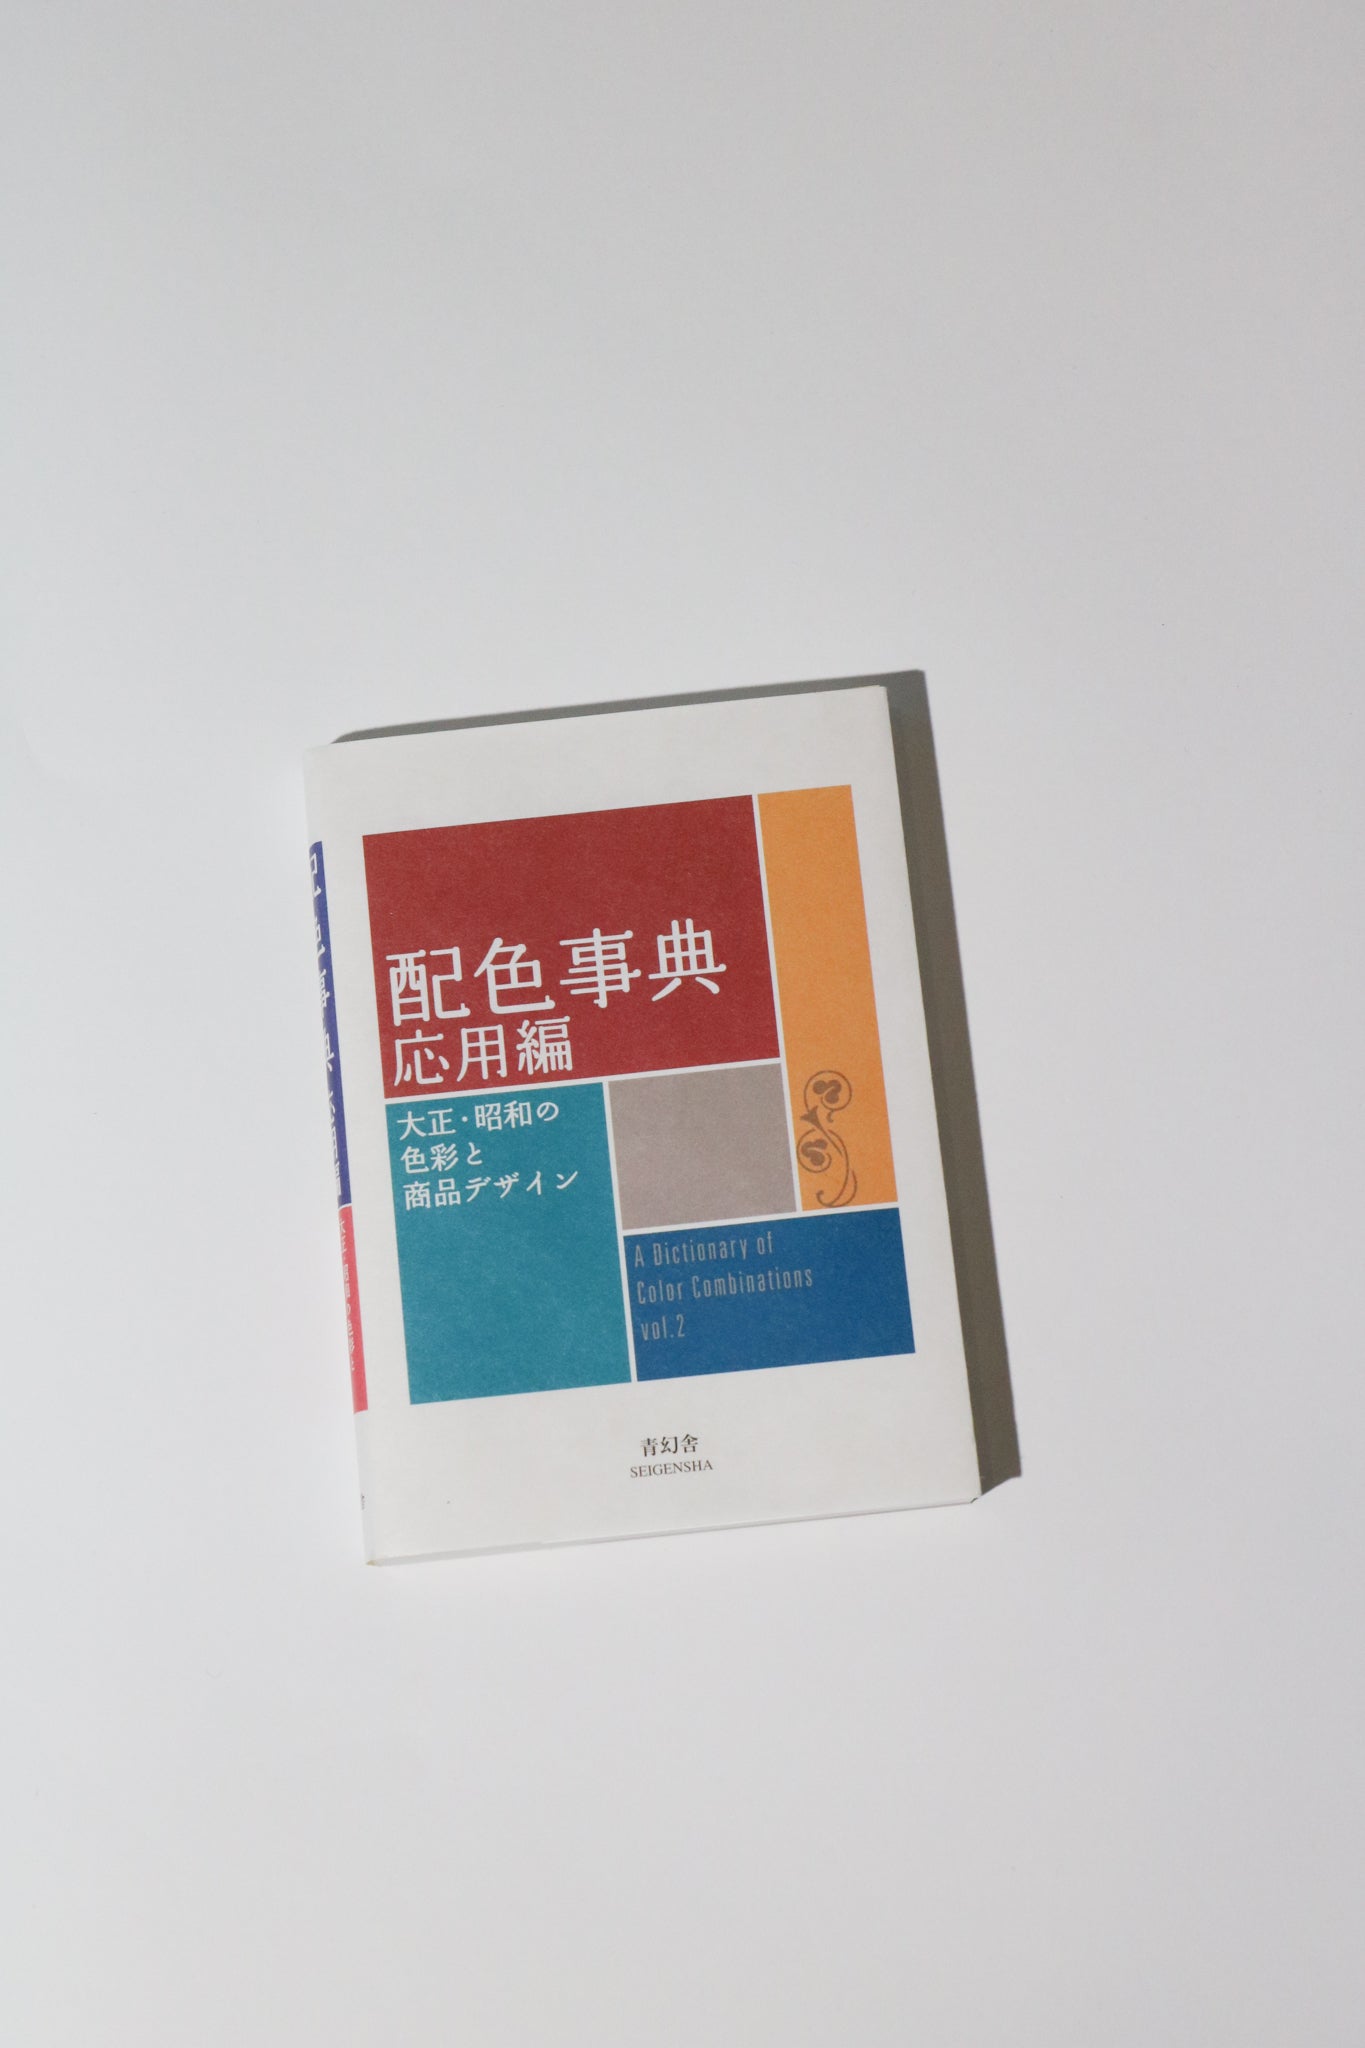 Japanese Color Dictionaries — Good Gray